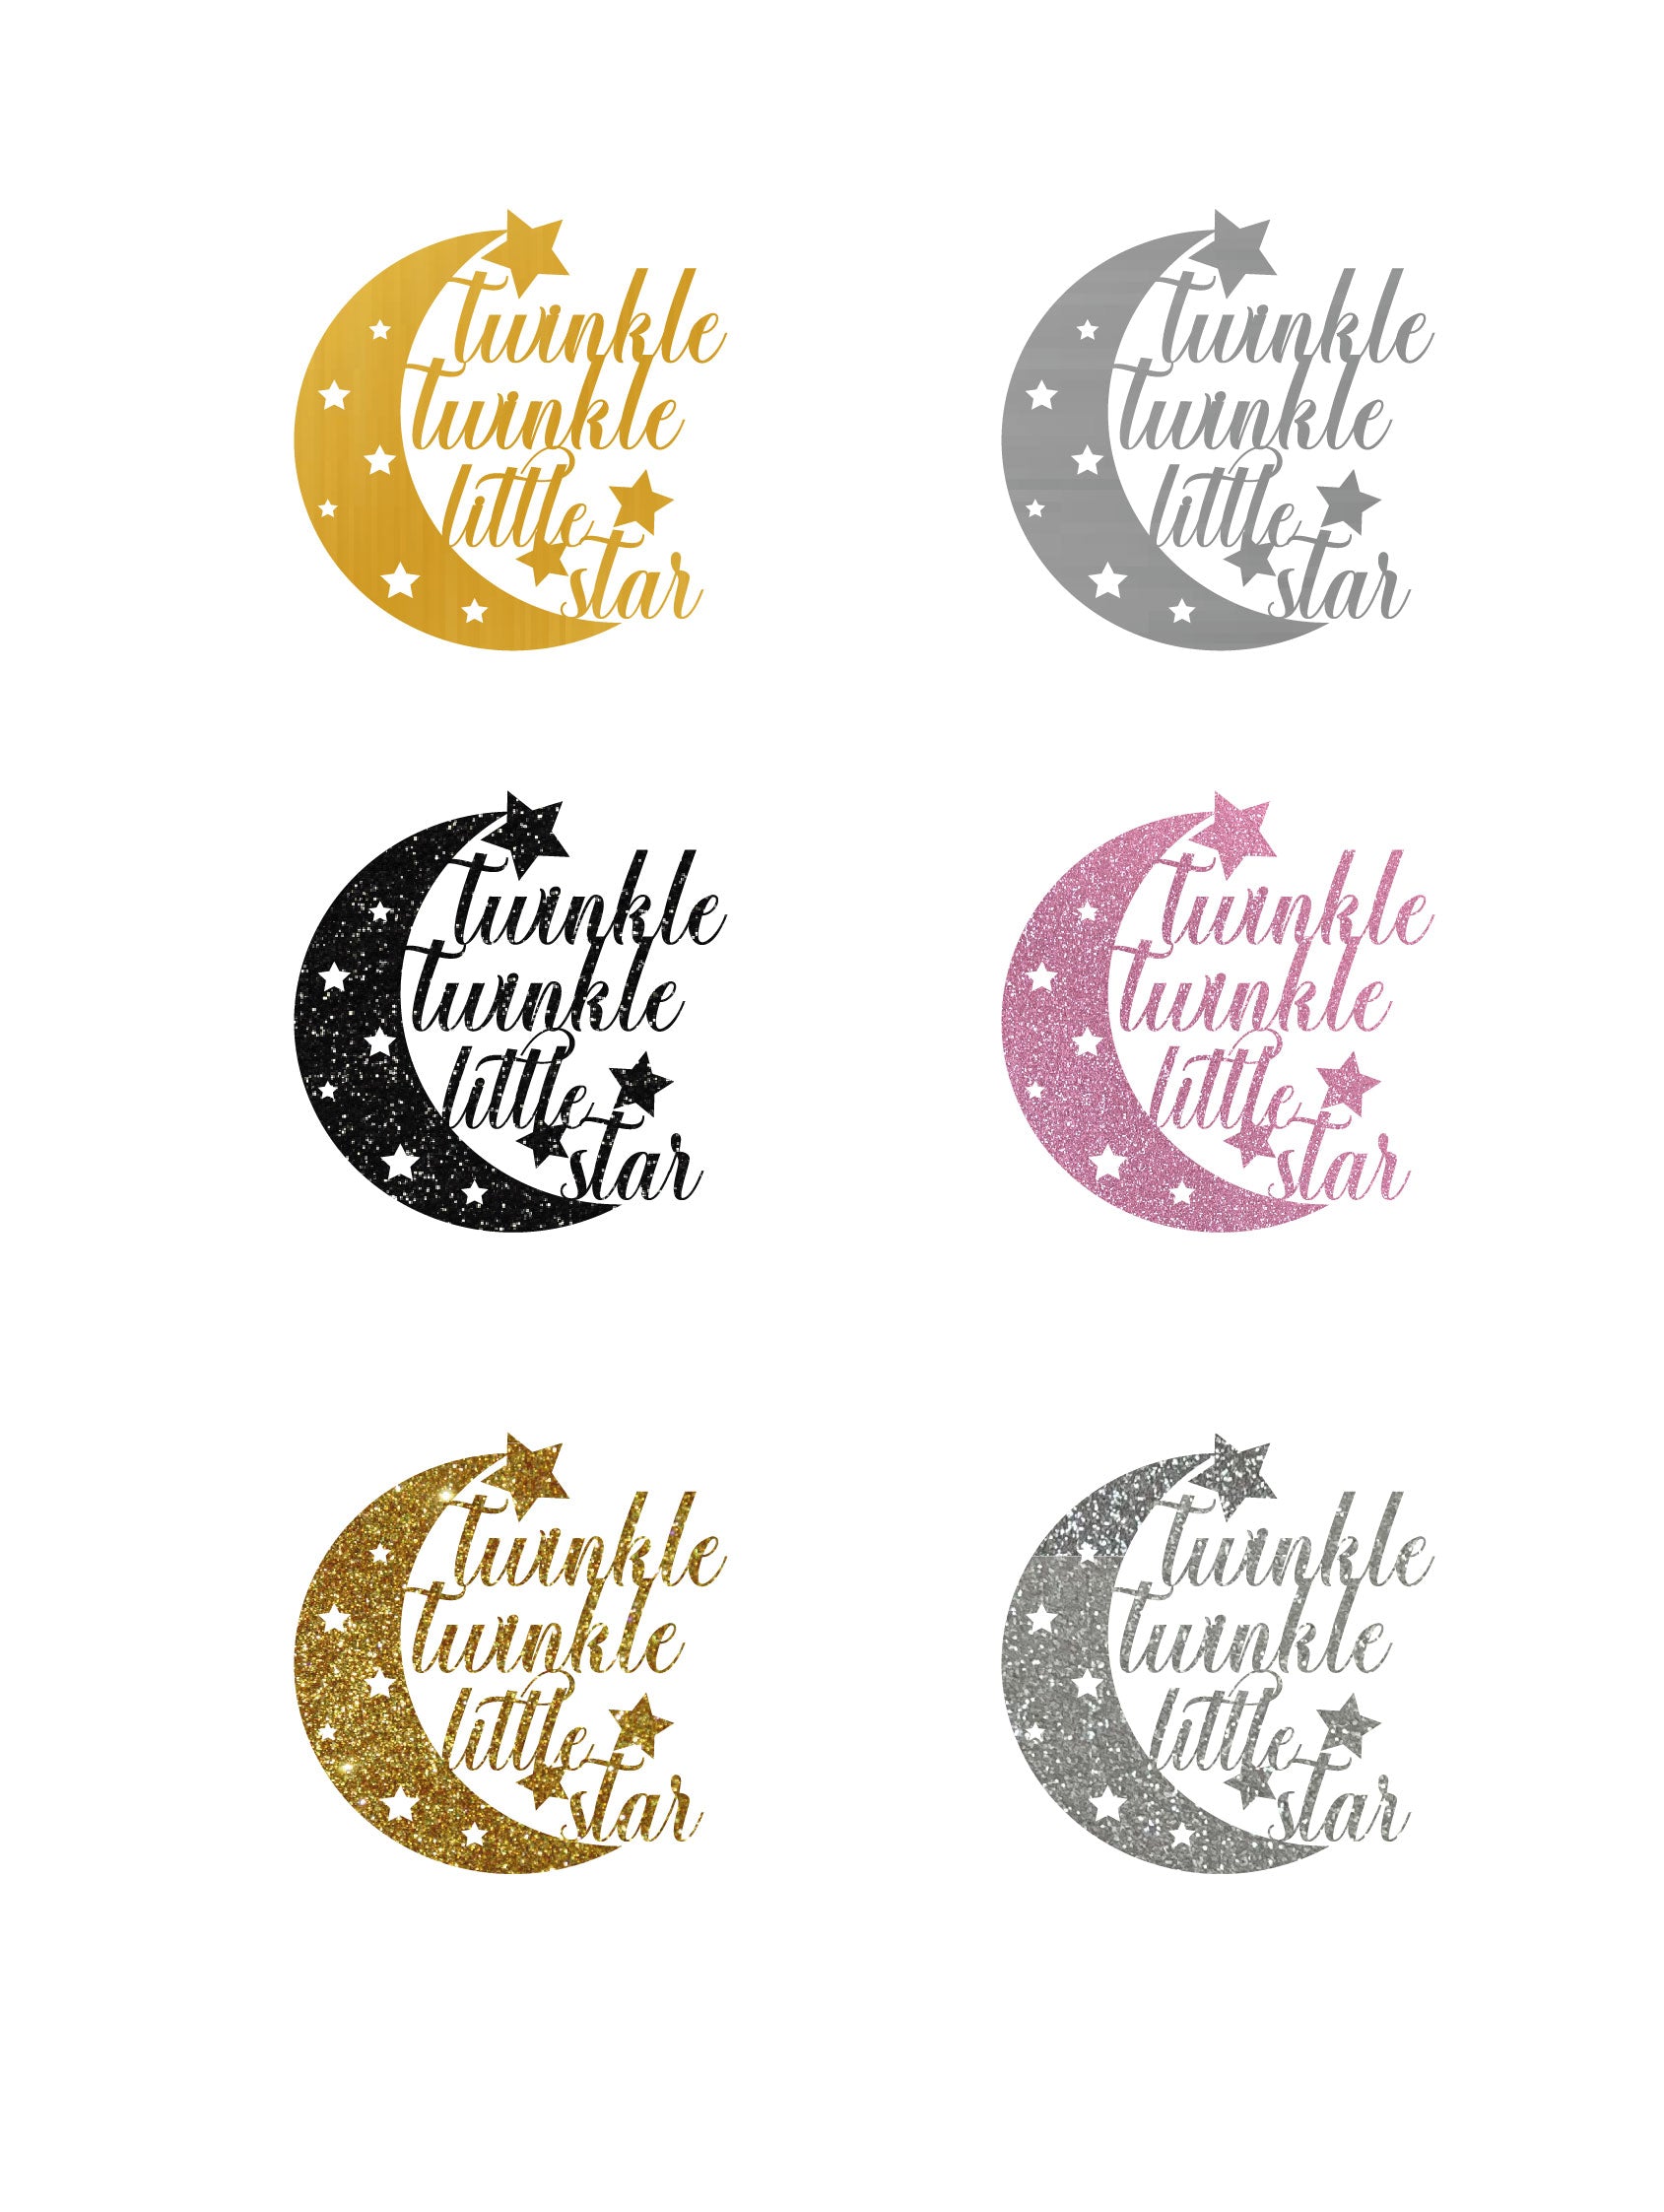 Style It Simply 'Twinkle Twinkle Little Star' Birthday Cake Topper - Color Selection